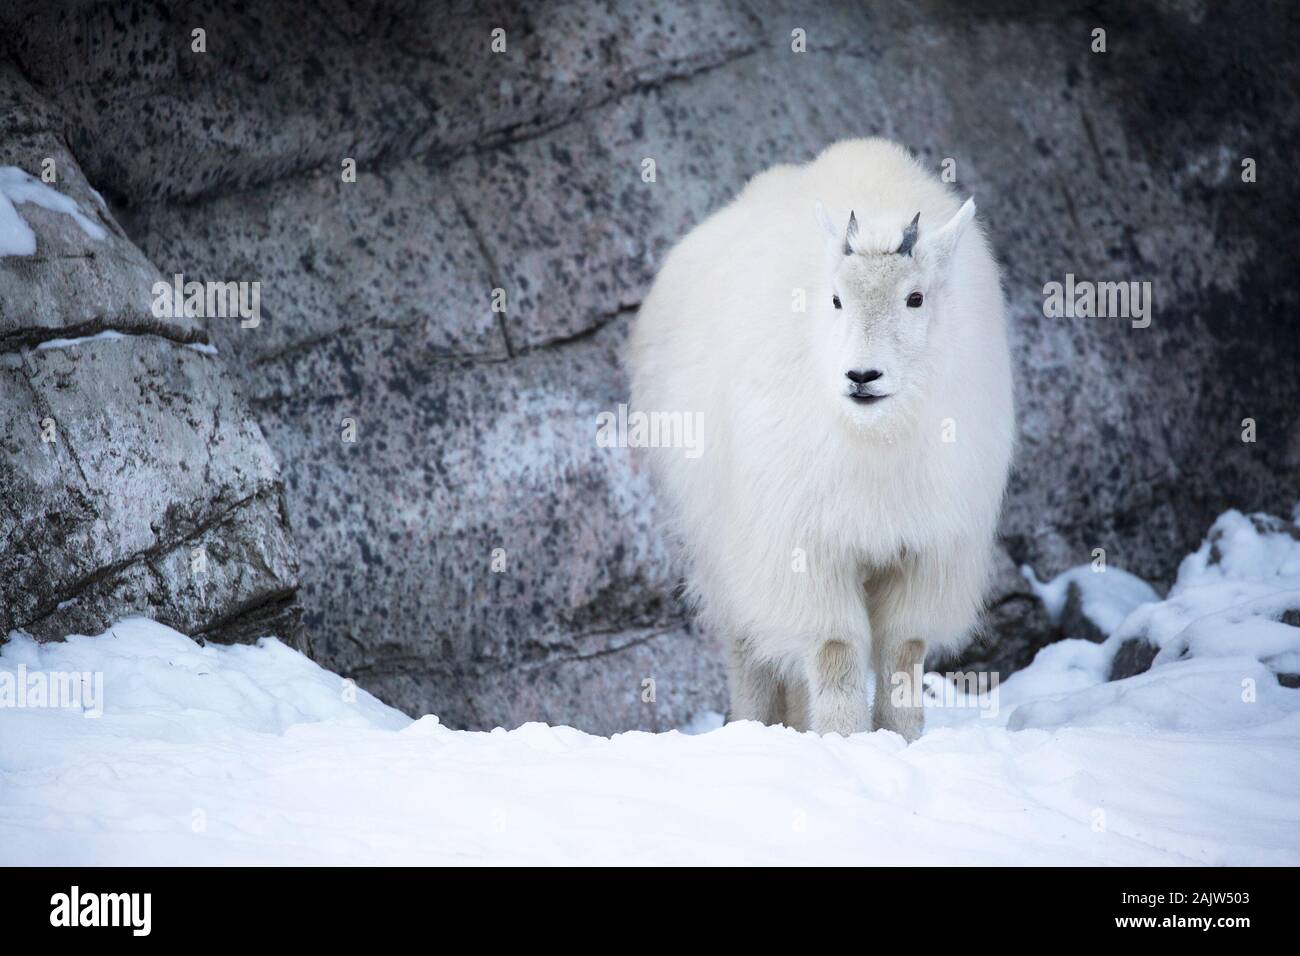 Rocky Mountain Goat (Oreamnos americanus) standing on snow at the Canadian Wilds exhibit of the Calgary zoo, Alberta, Canada Stock Photo